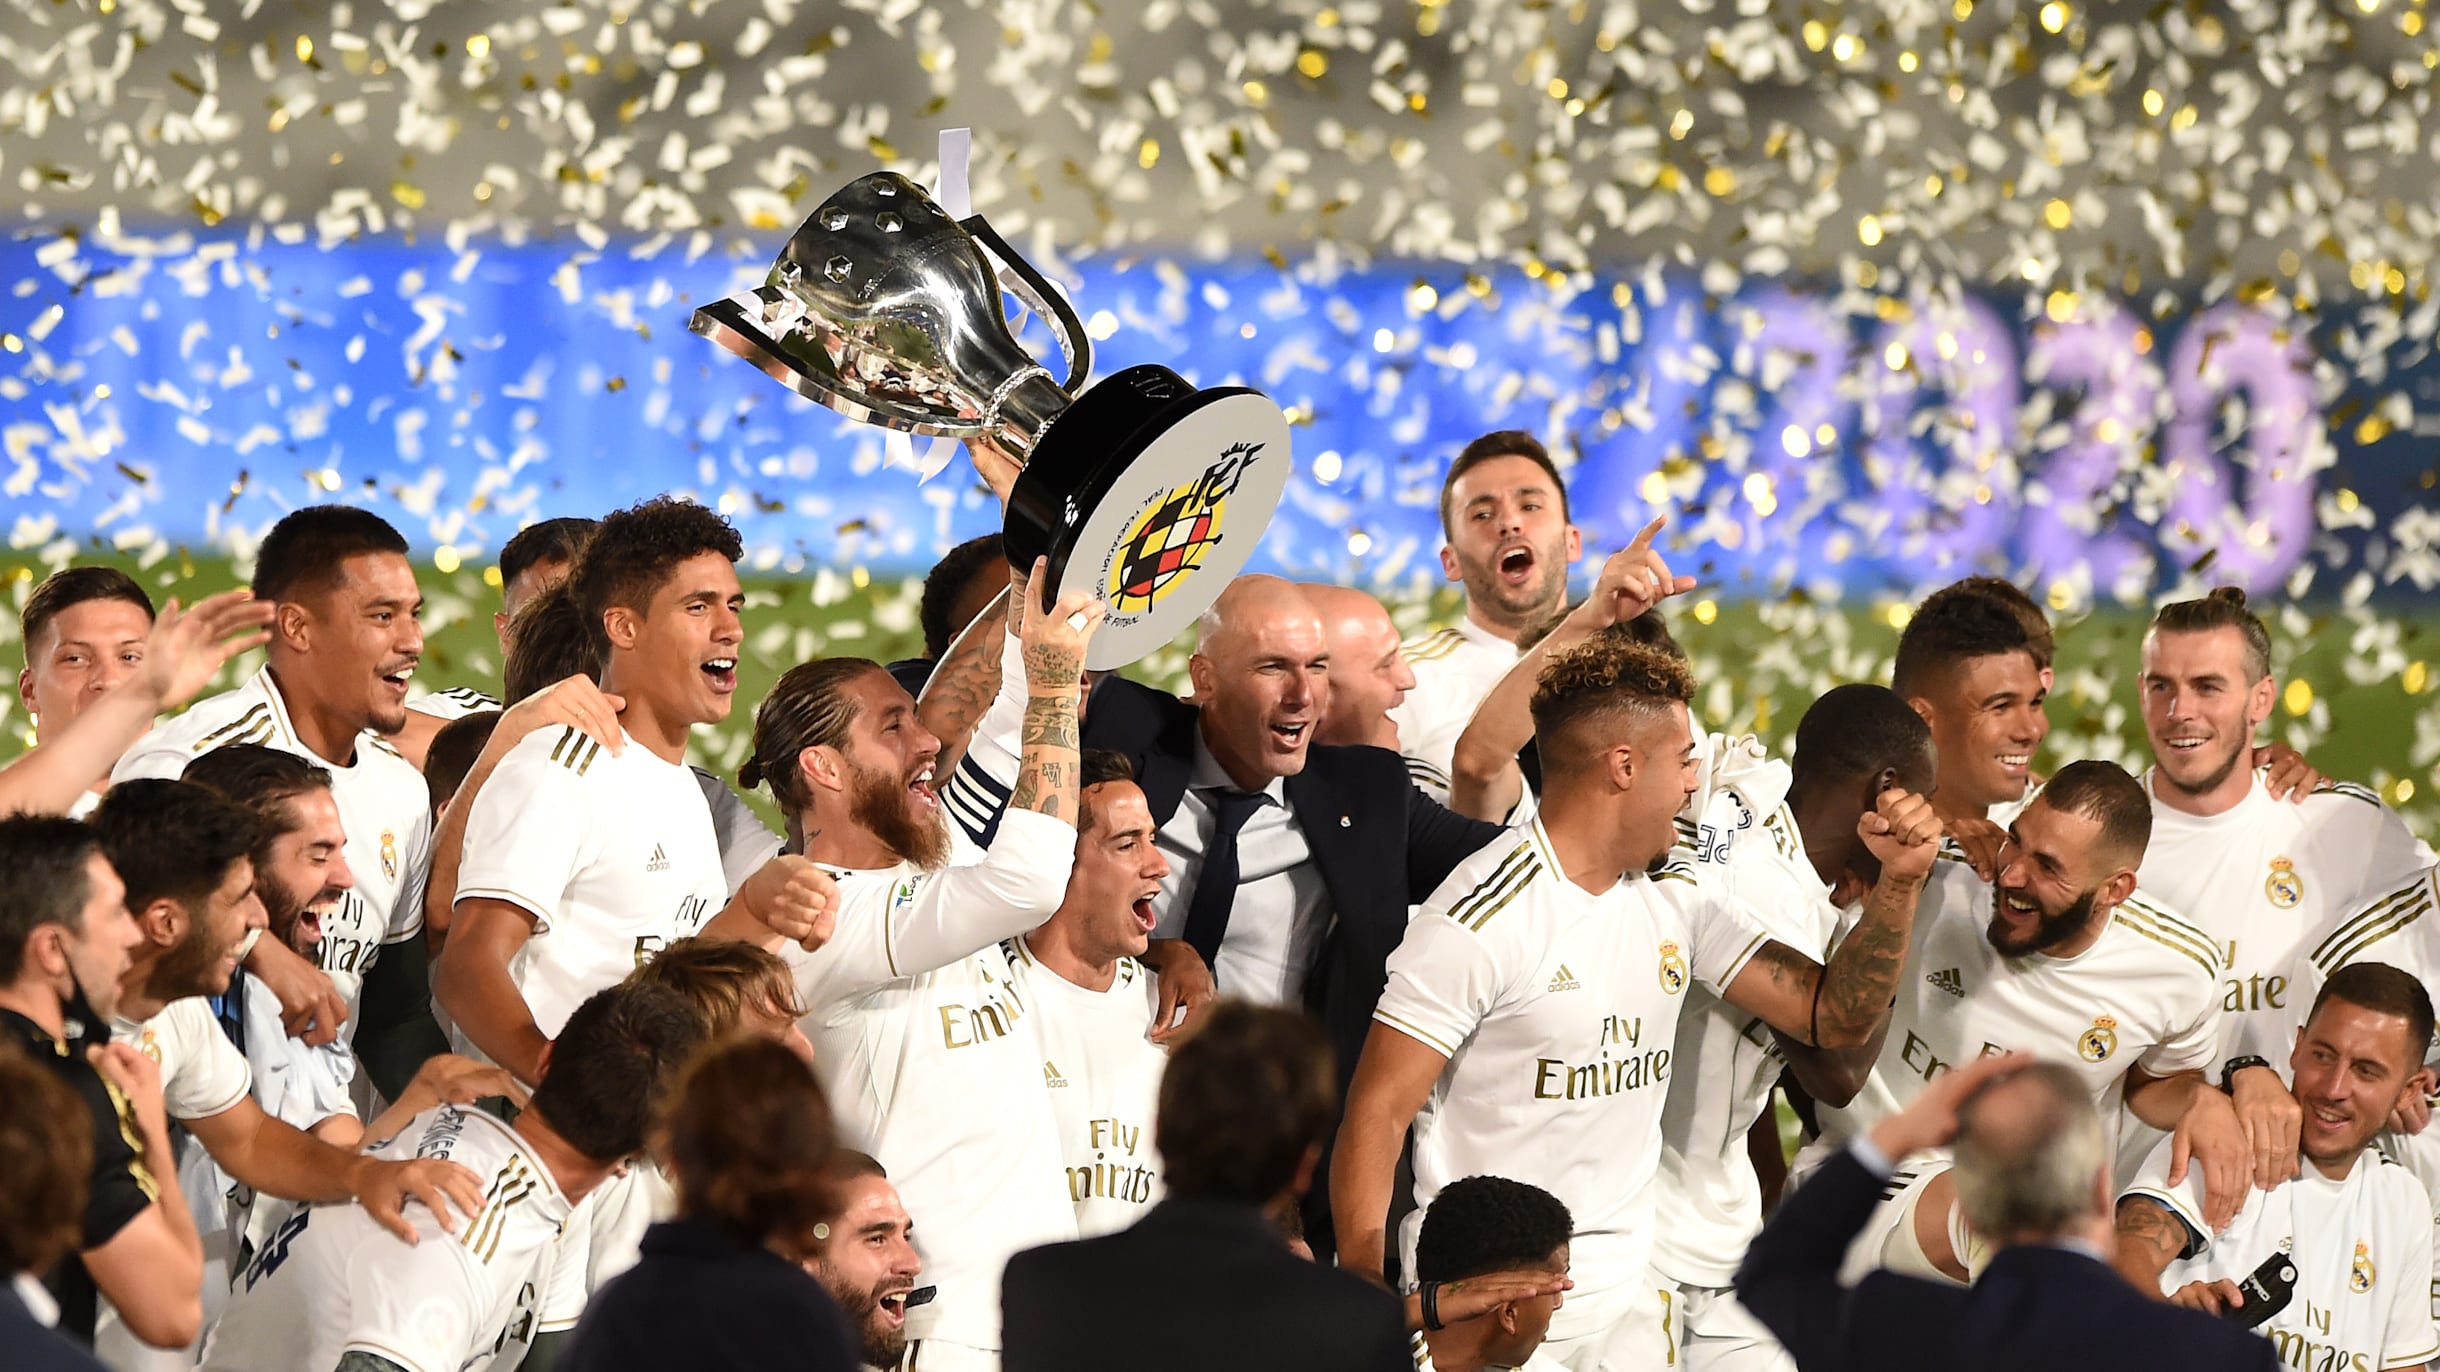 Real Madrid must start learning how to win without always relying